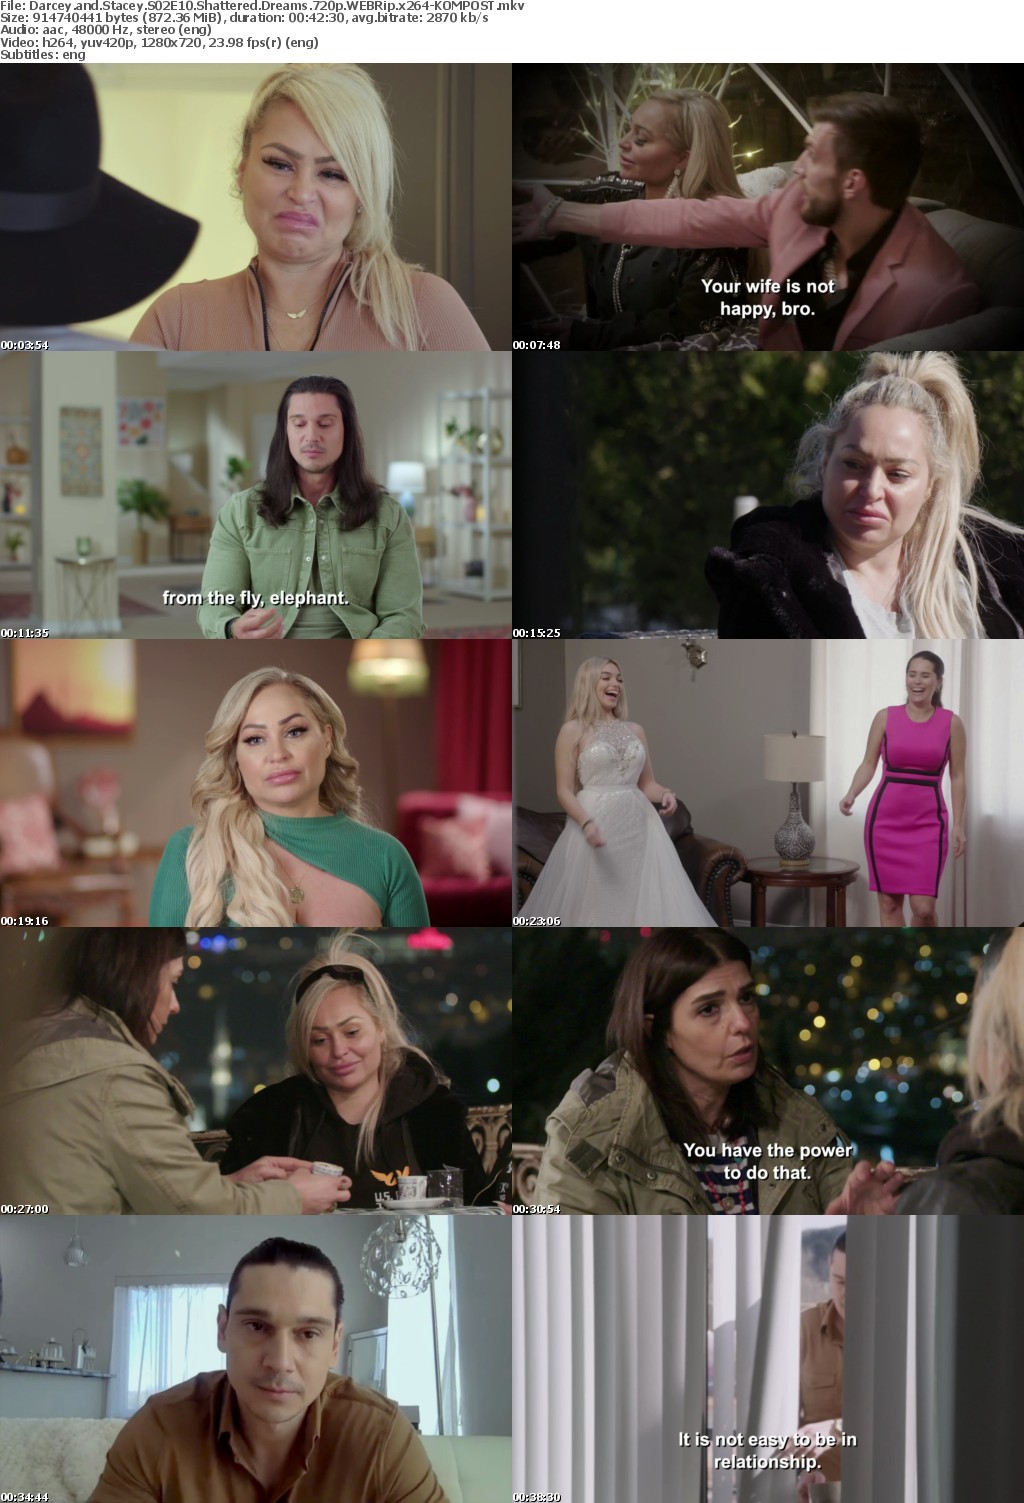 Darcey and Stacey S02E10 Shattered Dreams 720p WEBRip x264-KOMPOST